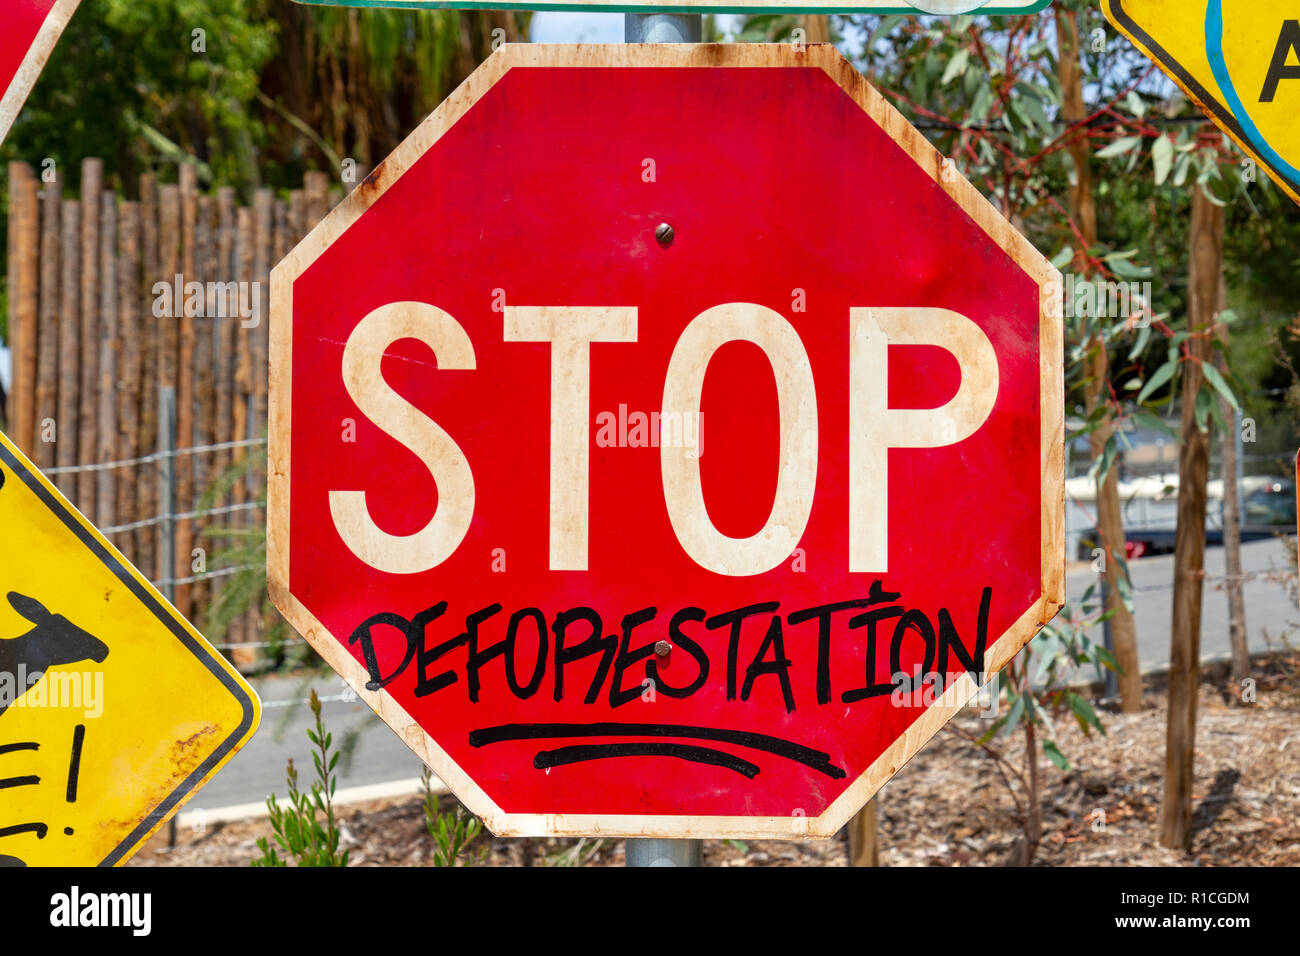 Road traffic sign adapted with environmentally friendly message ('STOP' sign says 'STOP DEFORESTATION', San Diego Zoo Safari Park, Escondido, CA, USA. Stock Photo